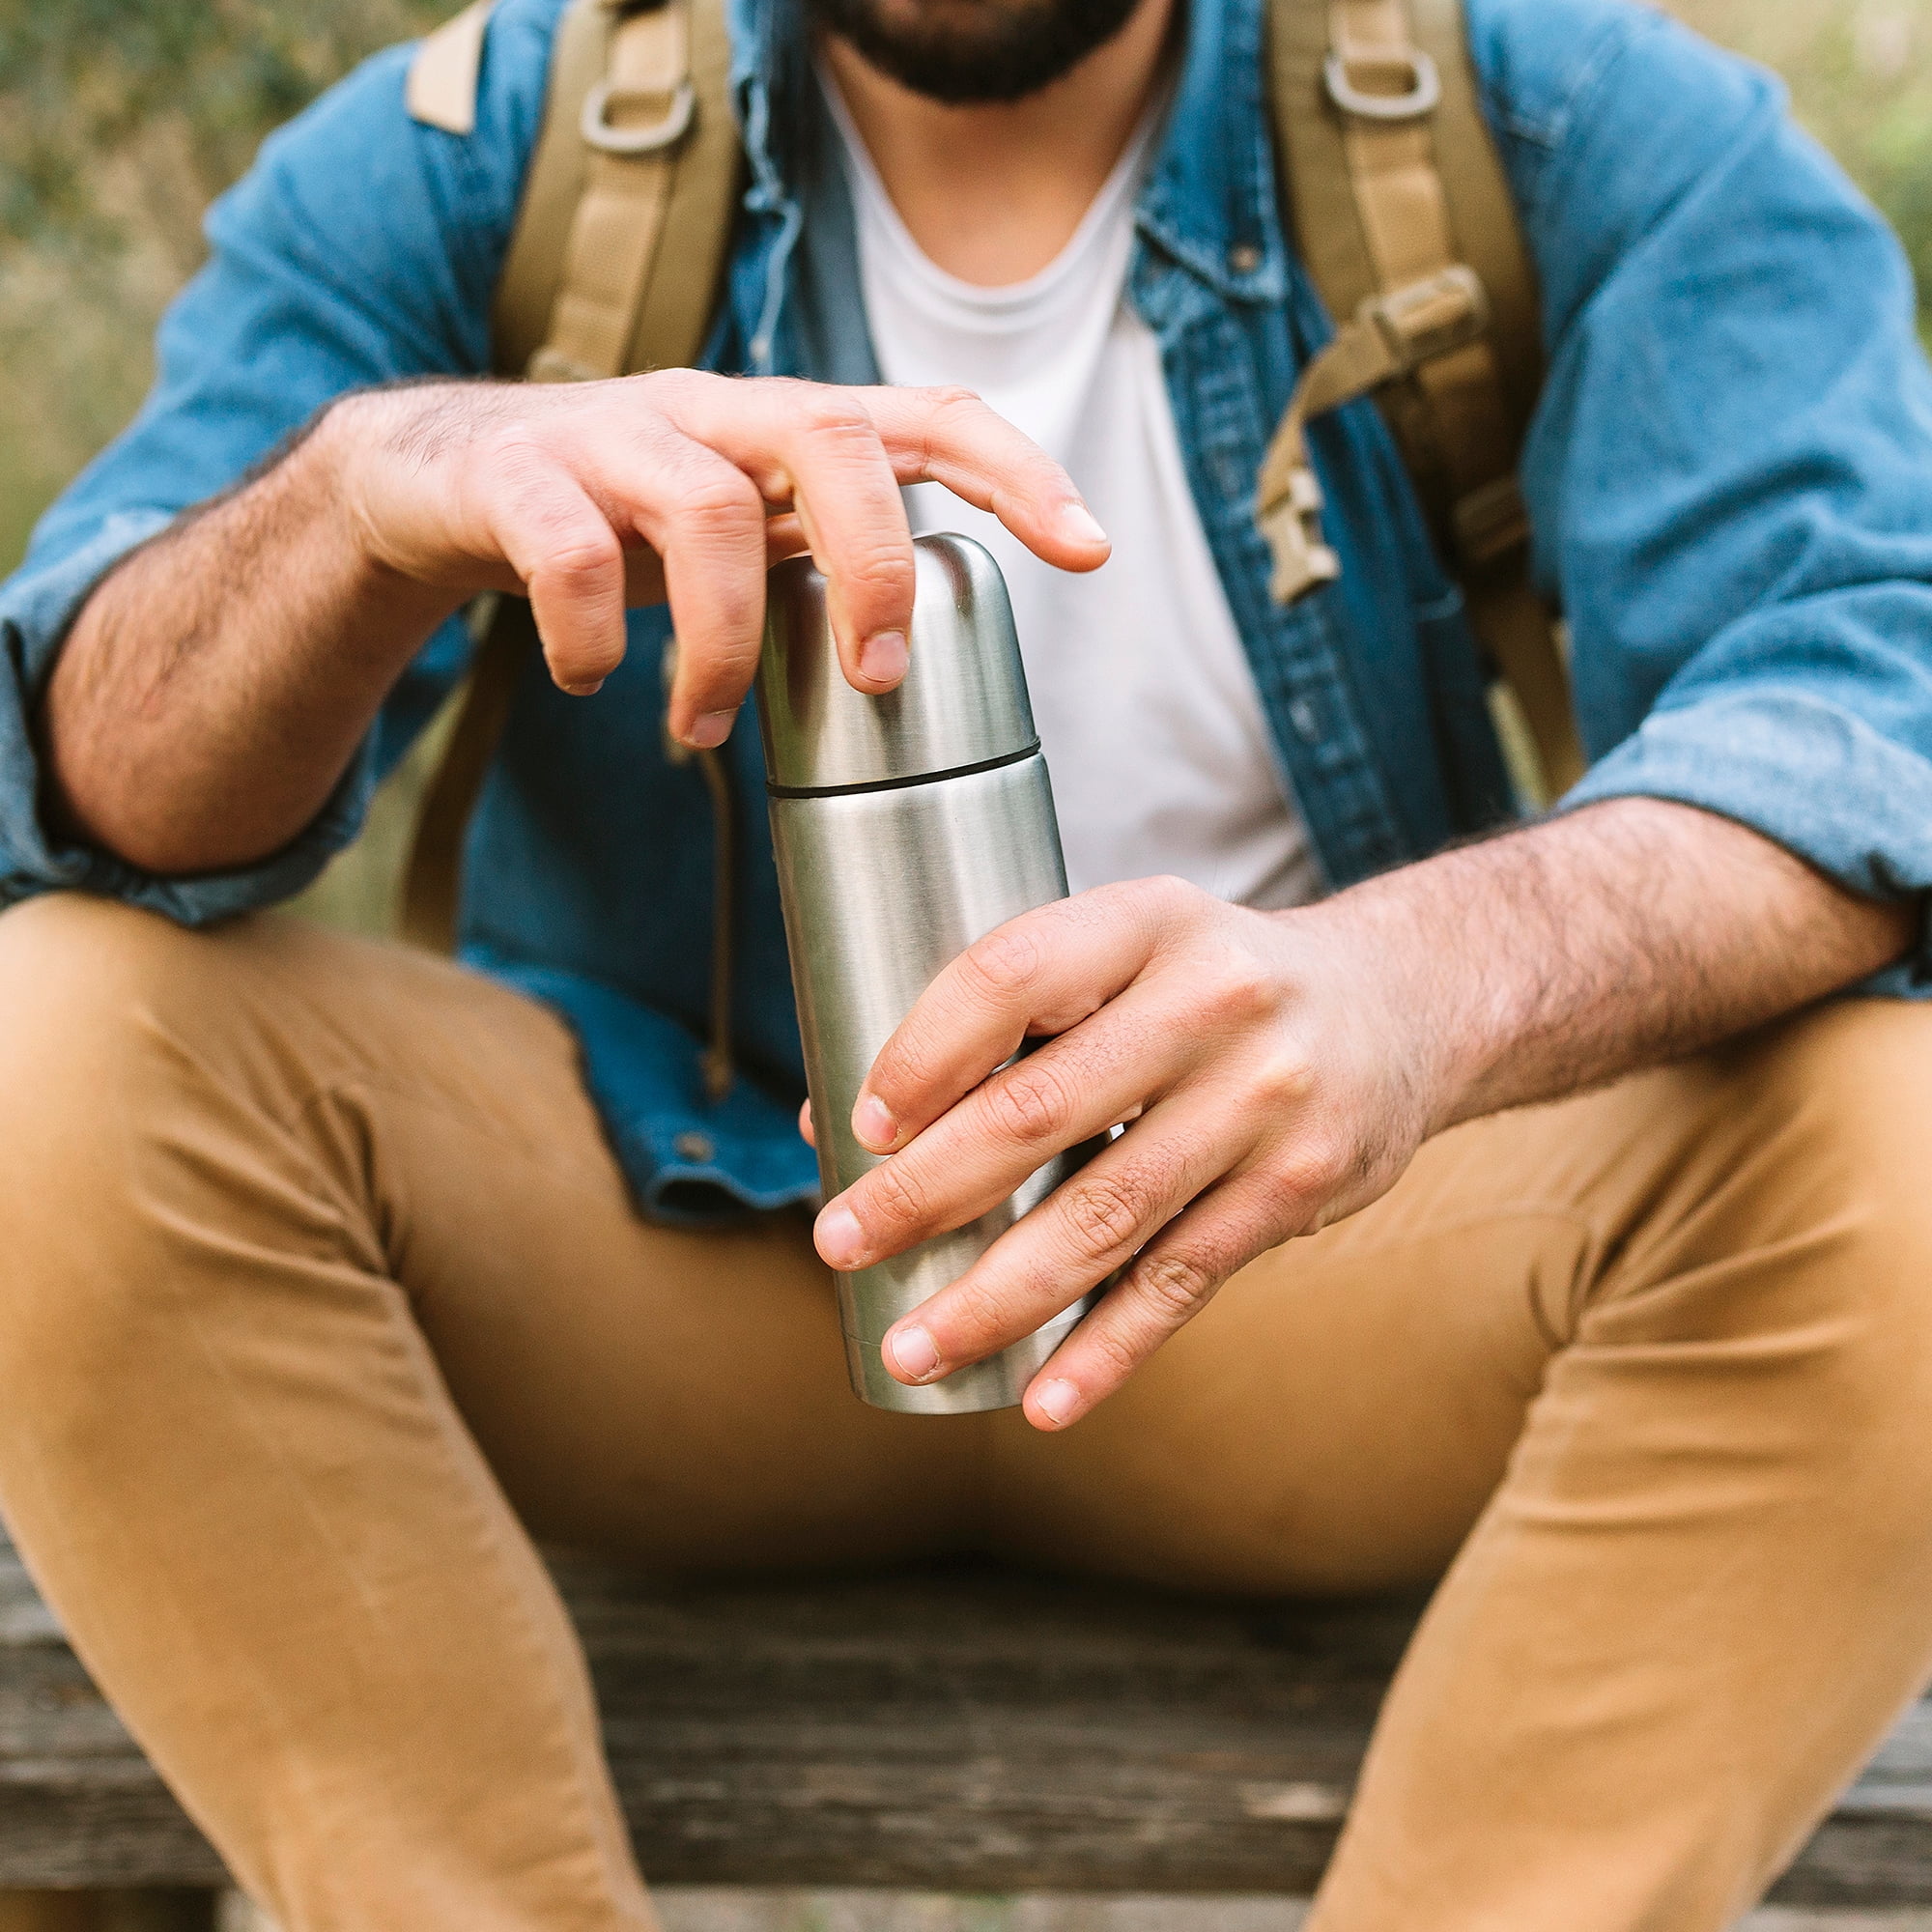 LeMardi Stainless Steel Insulated Flask Thermos with 3 Attachable Mugs- Perfect for Travel, Work, Picnics, Coffee, & Tea (Hot/Cold for 12 Hours)